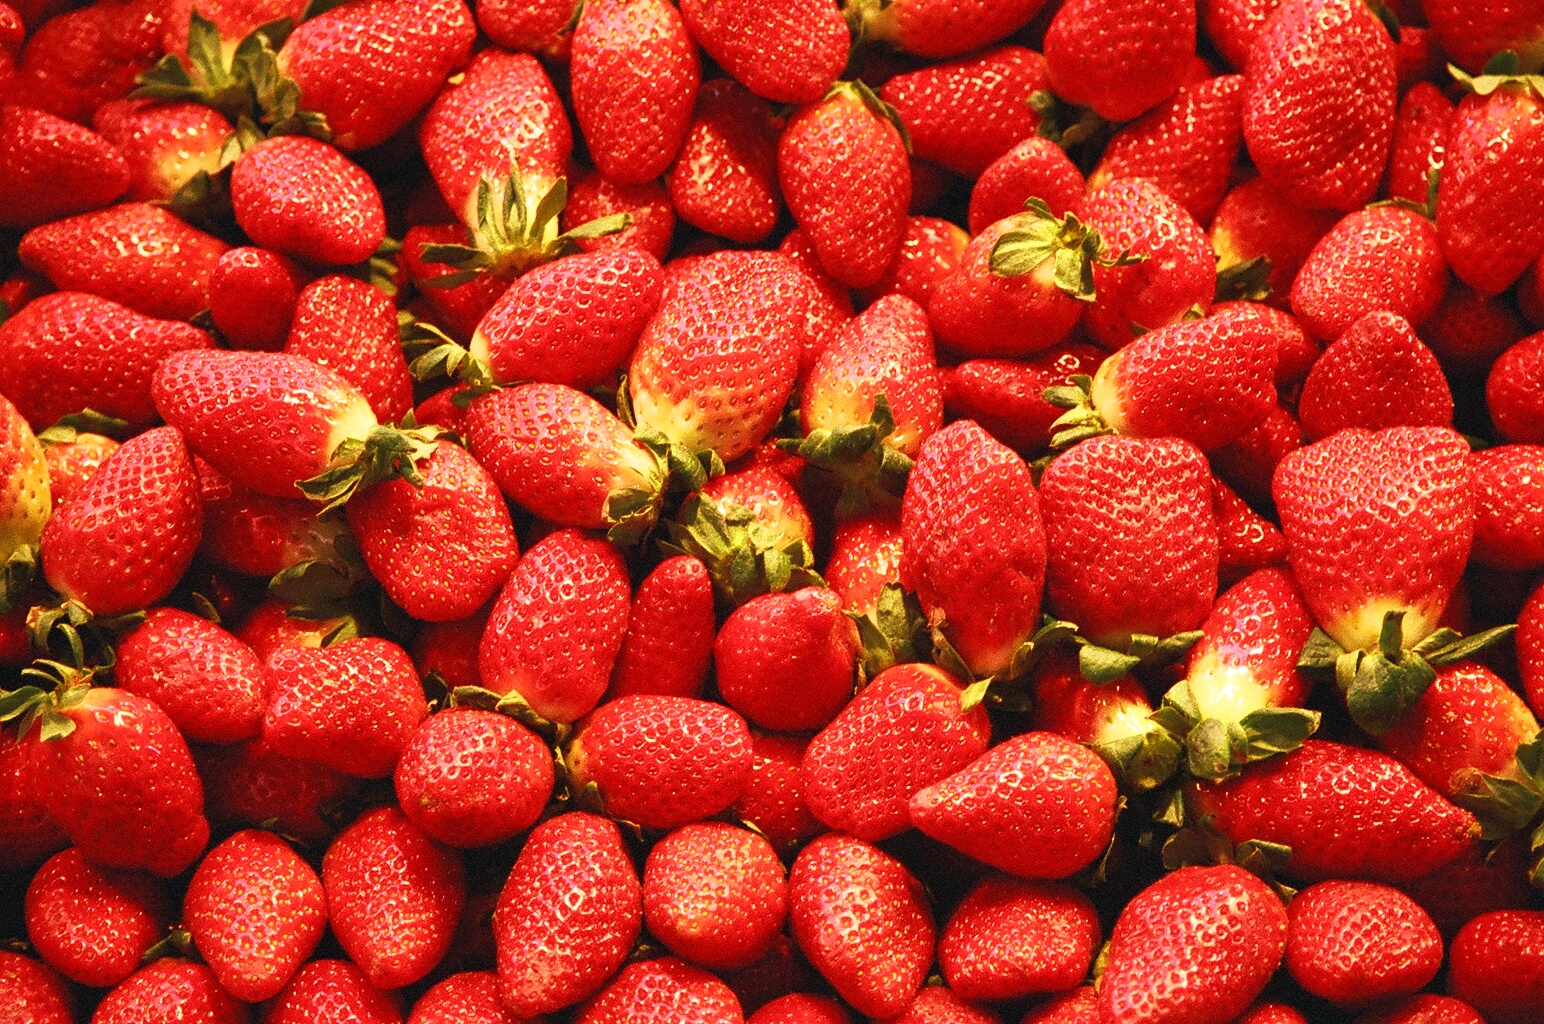 The strawberries were grown near Faversham in Kent by one of the UK’s biggest glasshouse grower of strawberries